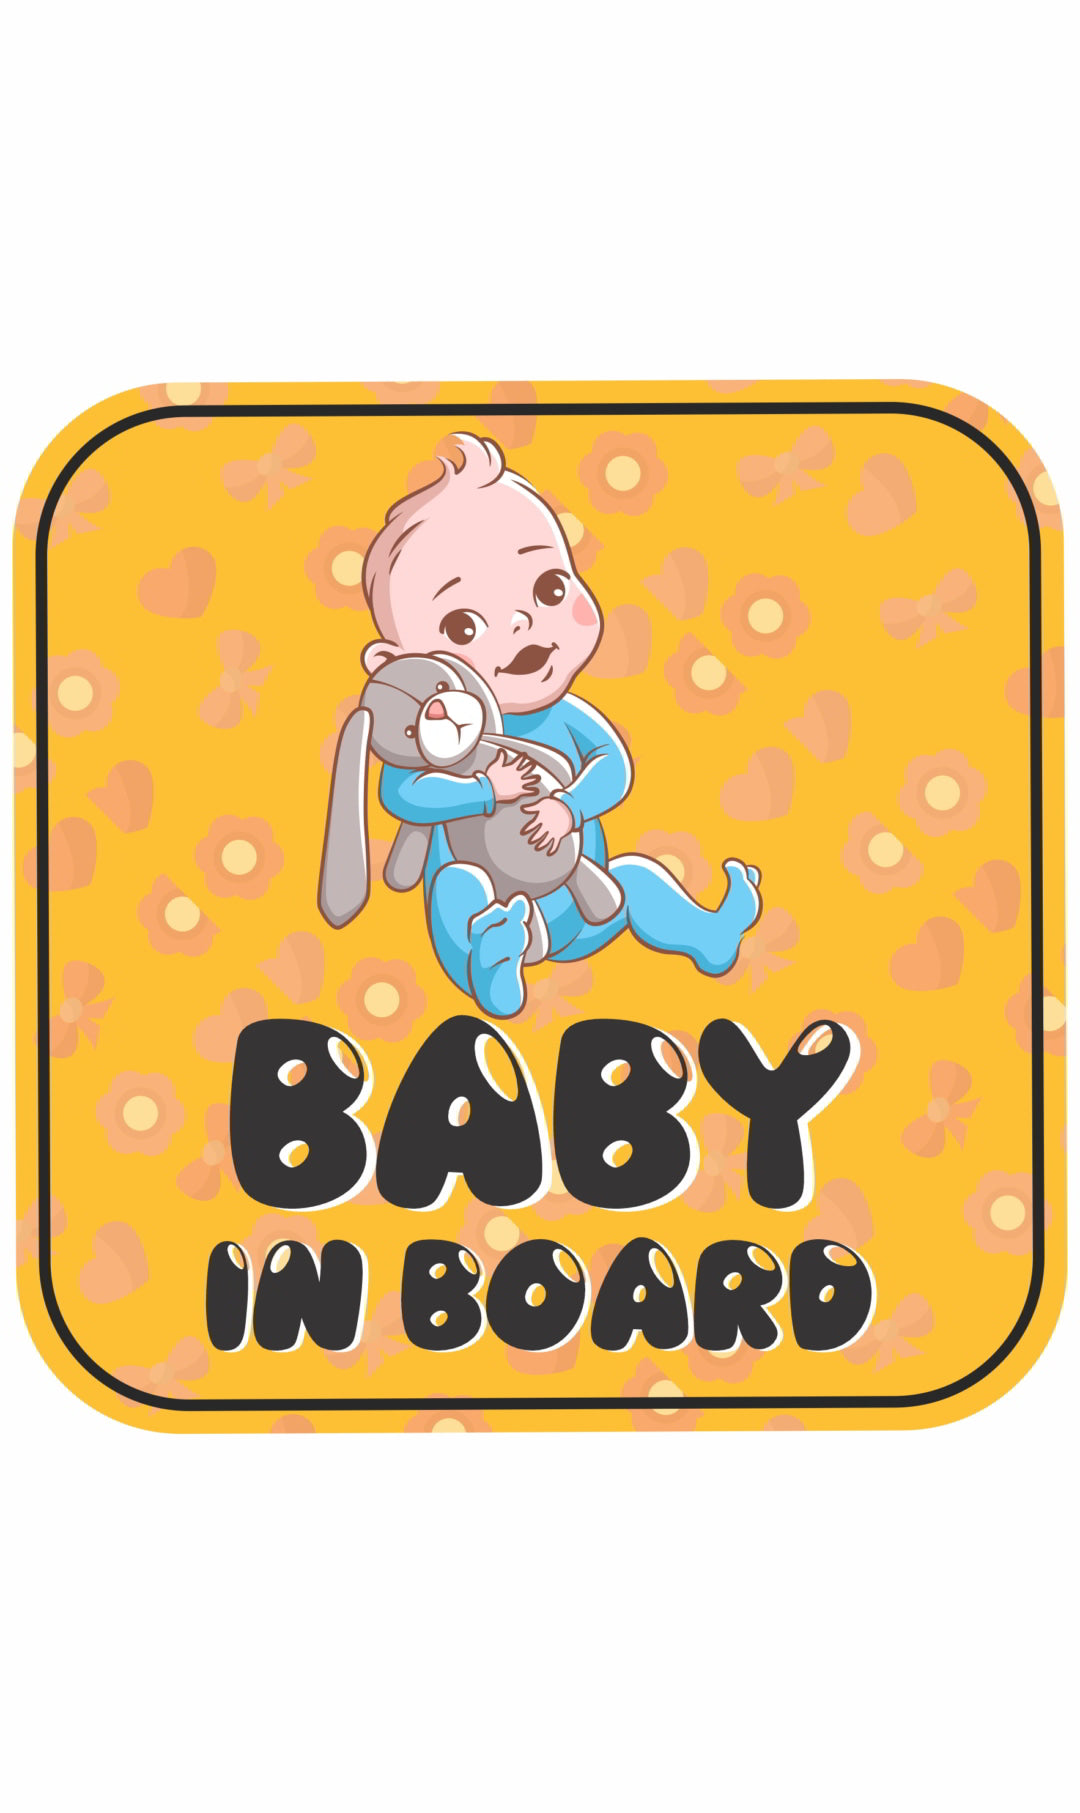 Baby in Board Decal Sticker(2pc)_c36